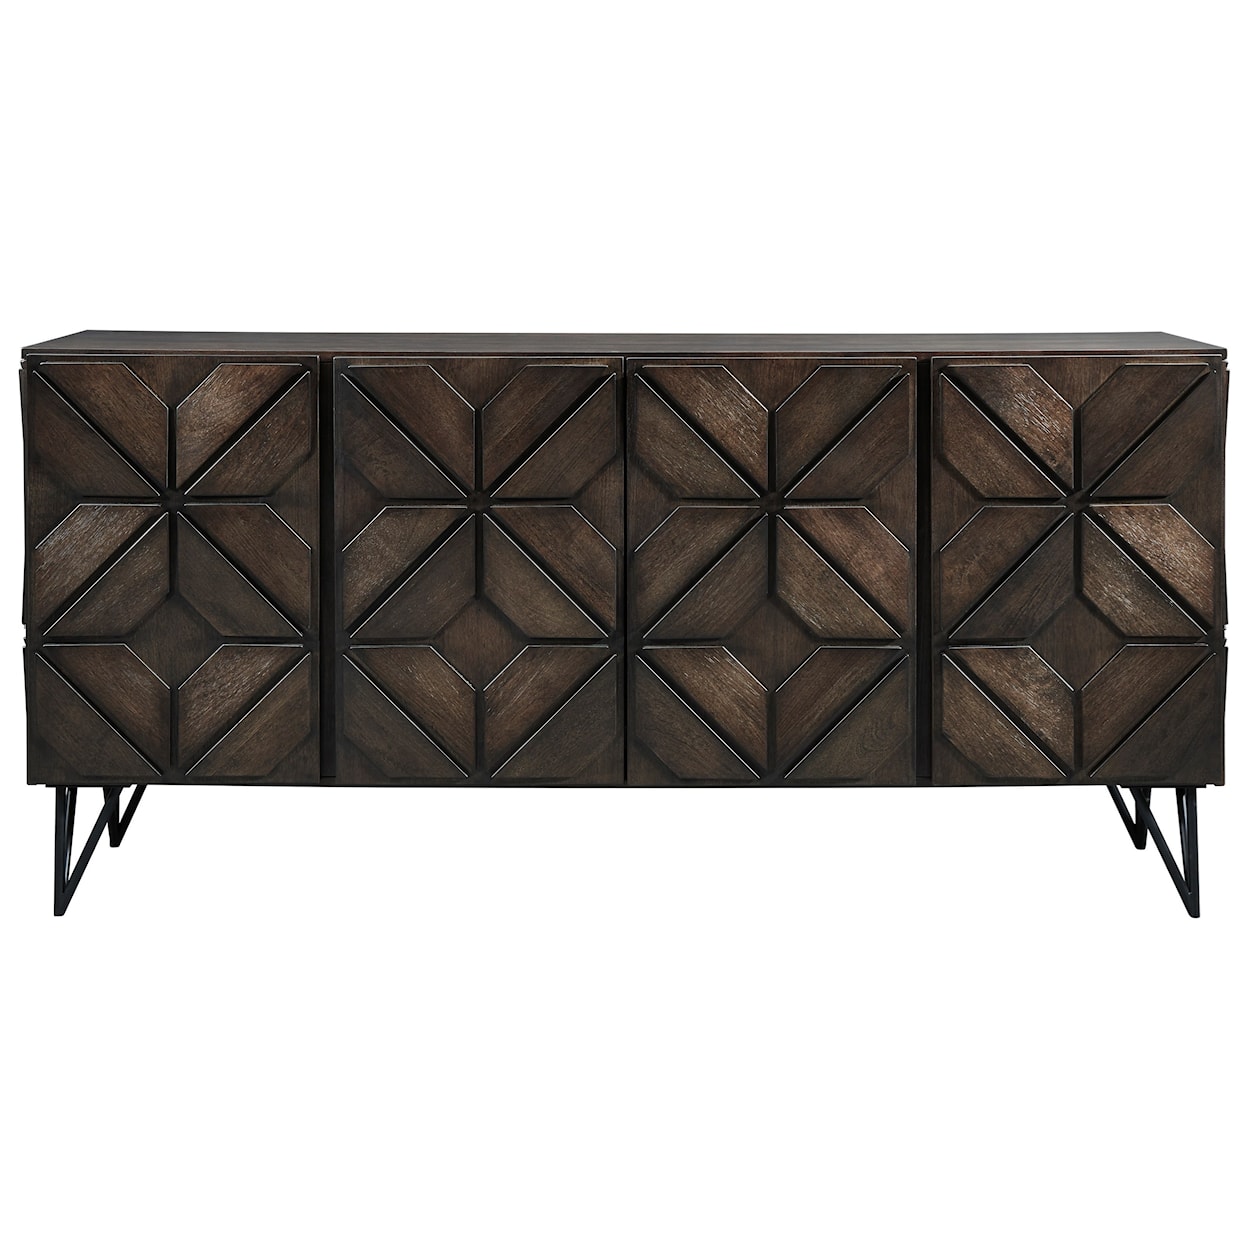 Signature Design Chasinfield Extra Large TV Stand